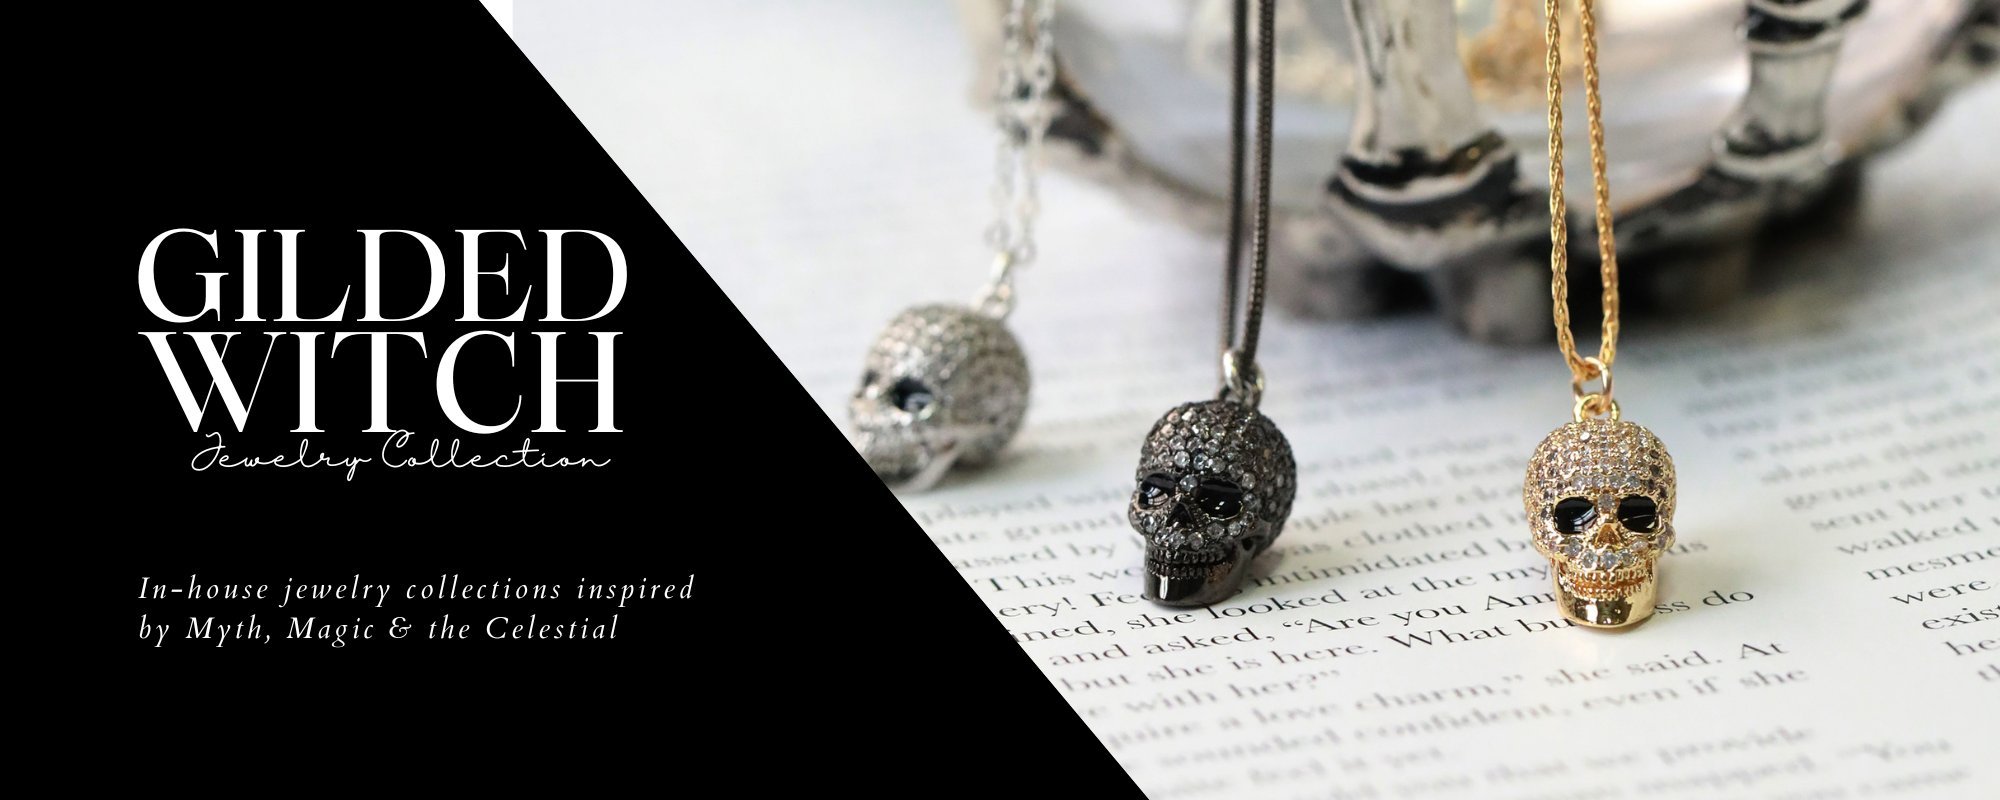 The Gilded Witch Jewelry Line - The Gilded Witch